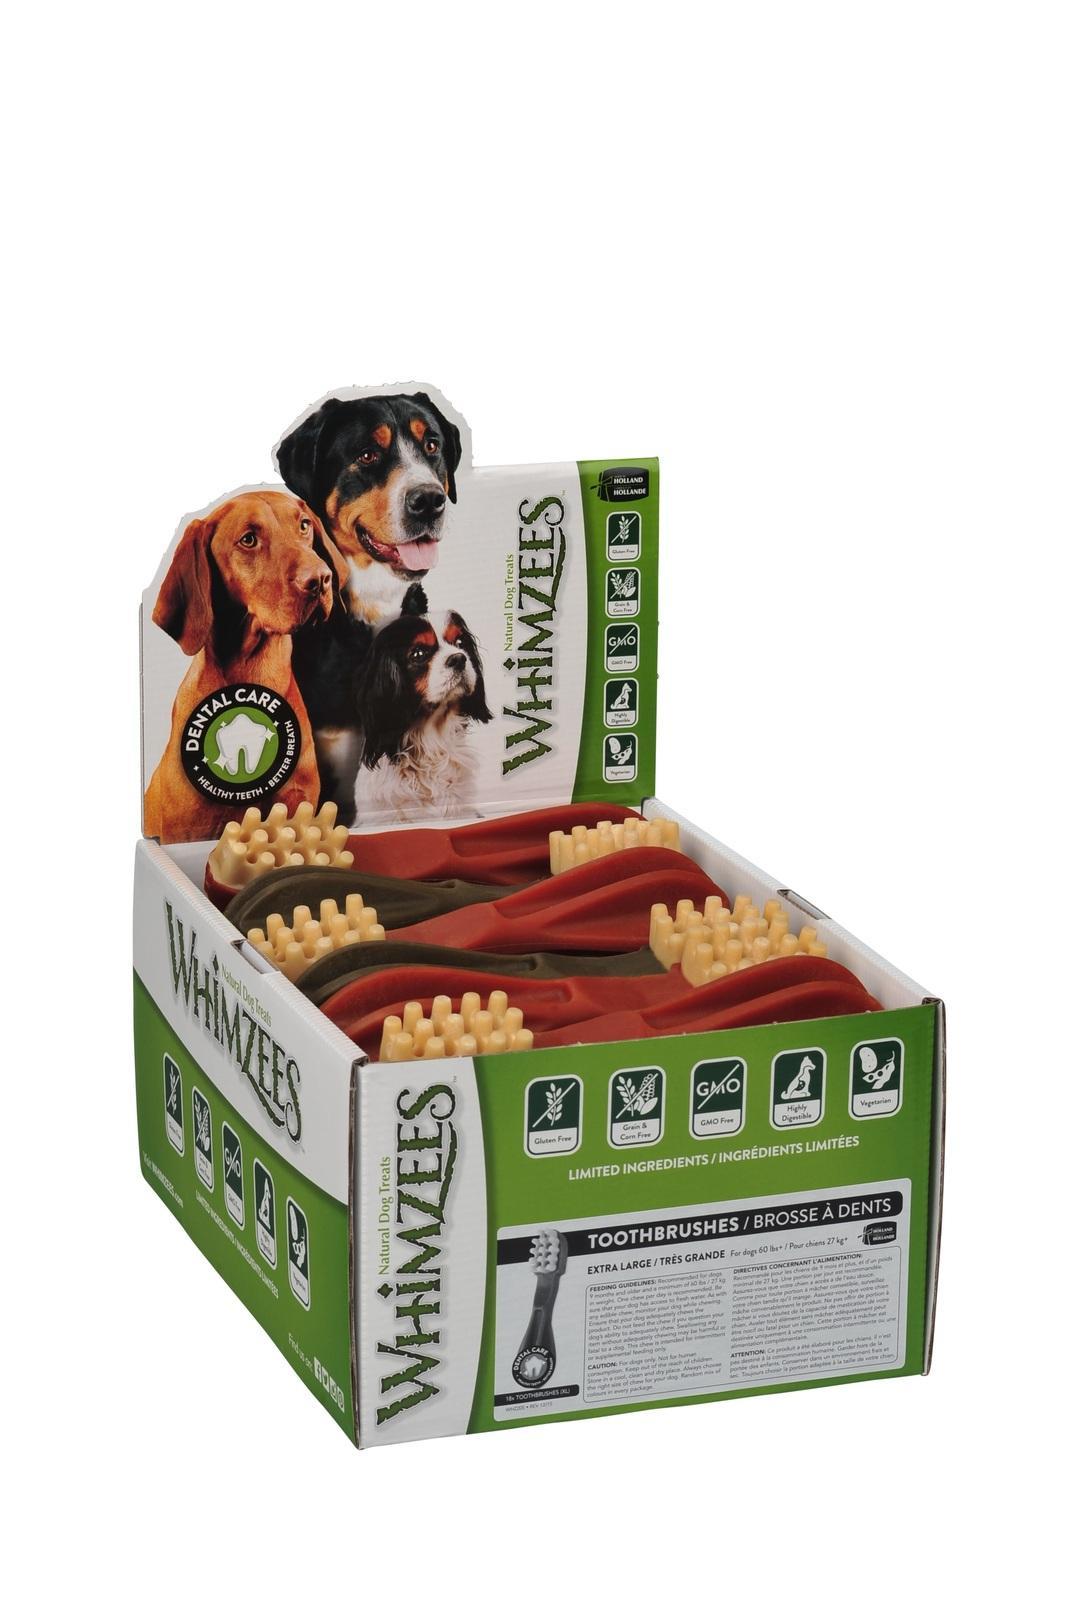 Whimzees Toothbrush Dental Care Dog Treat Display Box XL 18 Pack